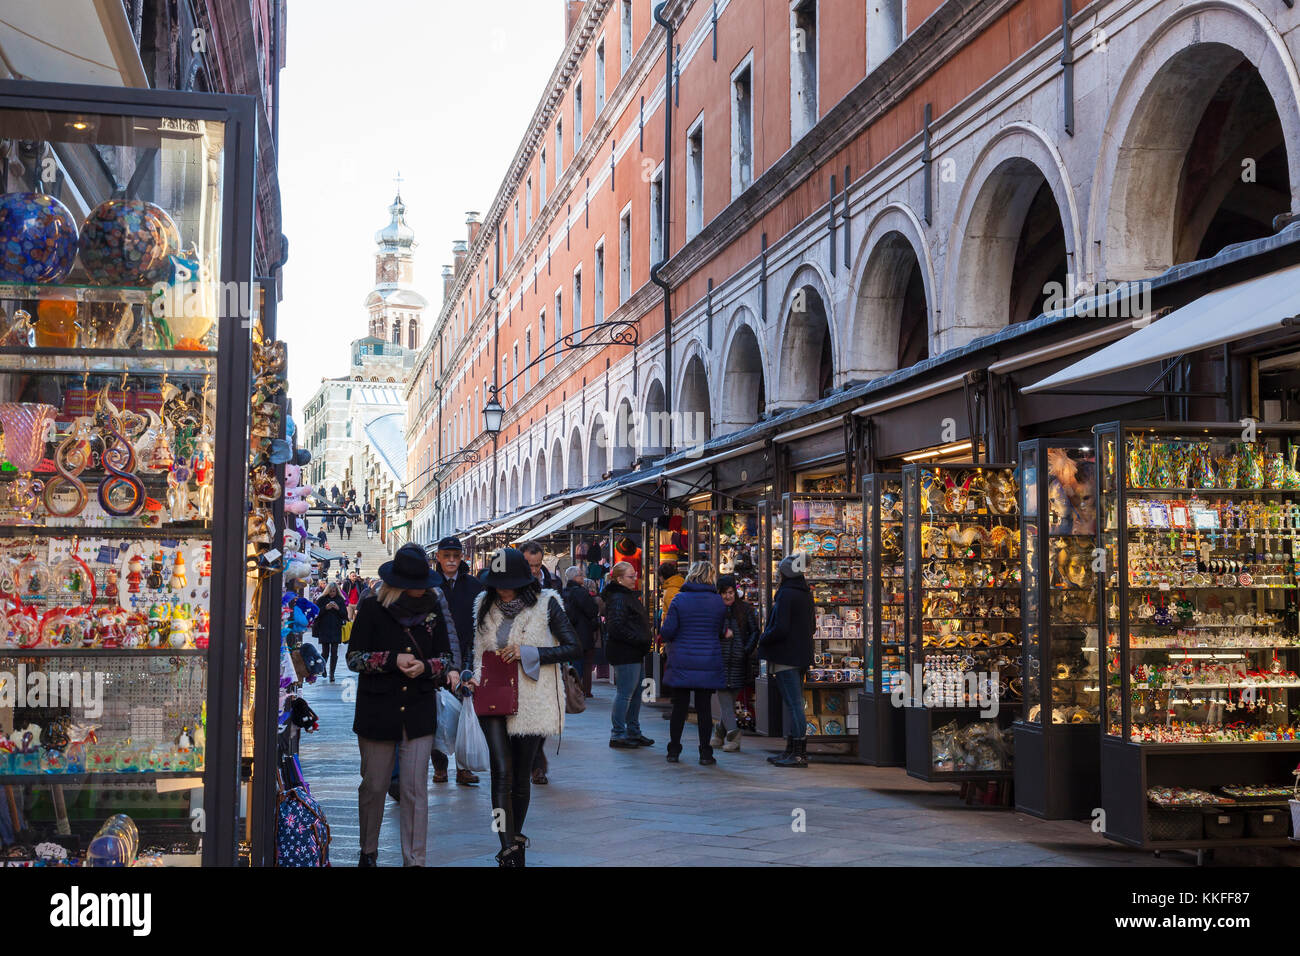 People shopping in brightly lit kiosks in Rialto Mercato, Venice, Italy on a cold autumn morning looking back to Rialto Bridge Stock Photo